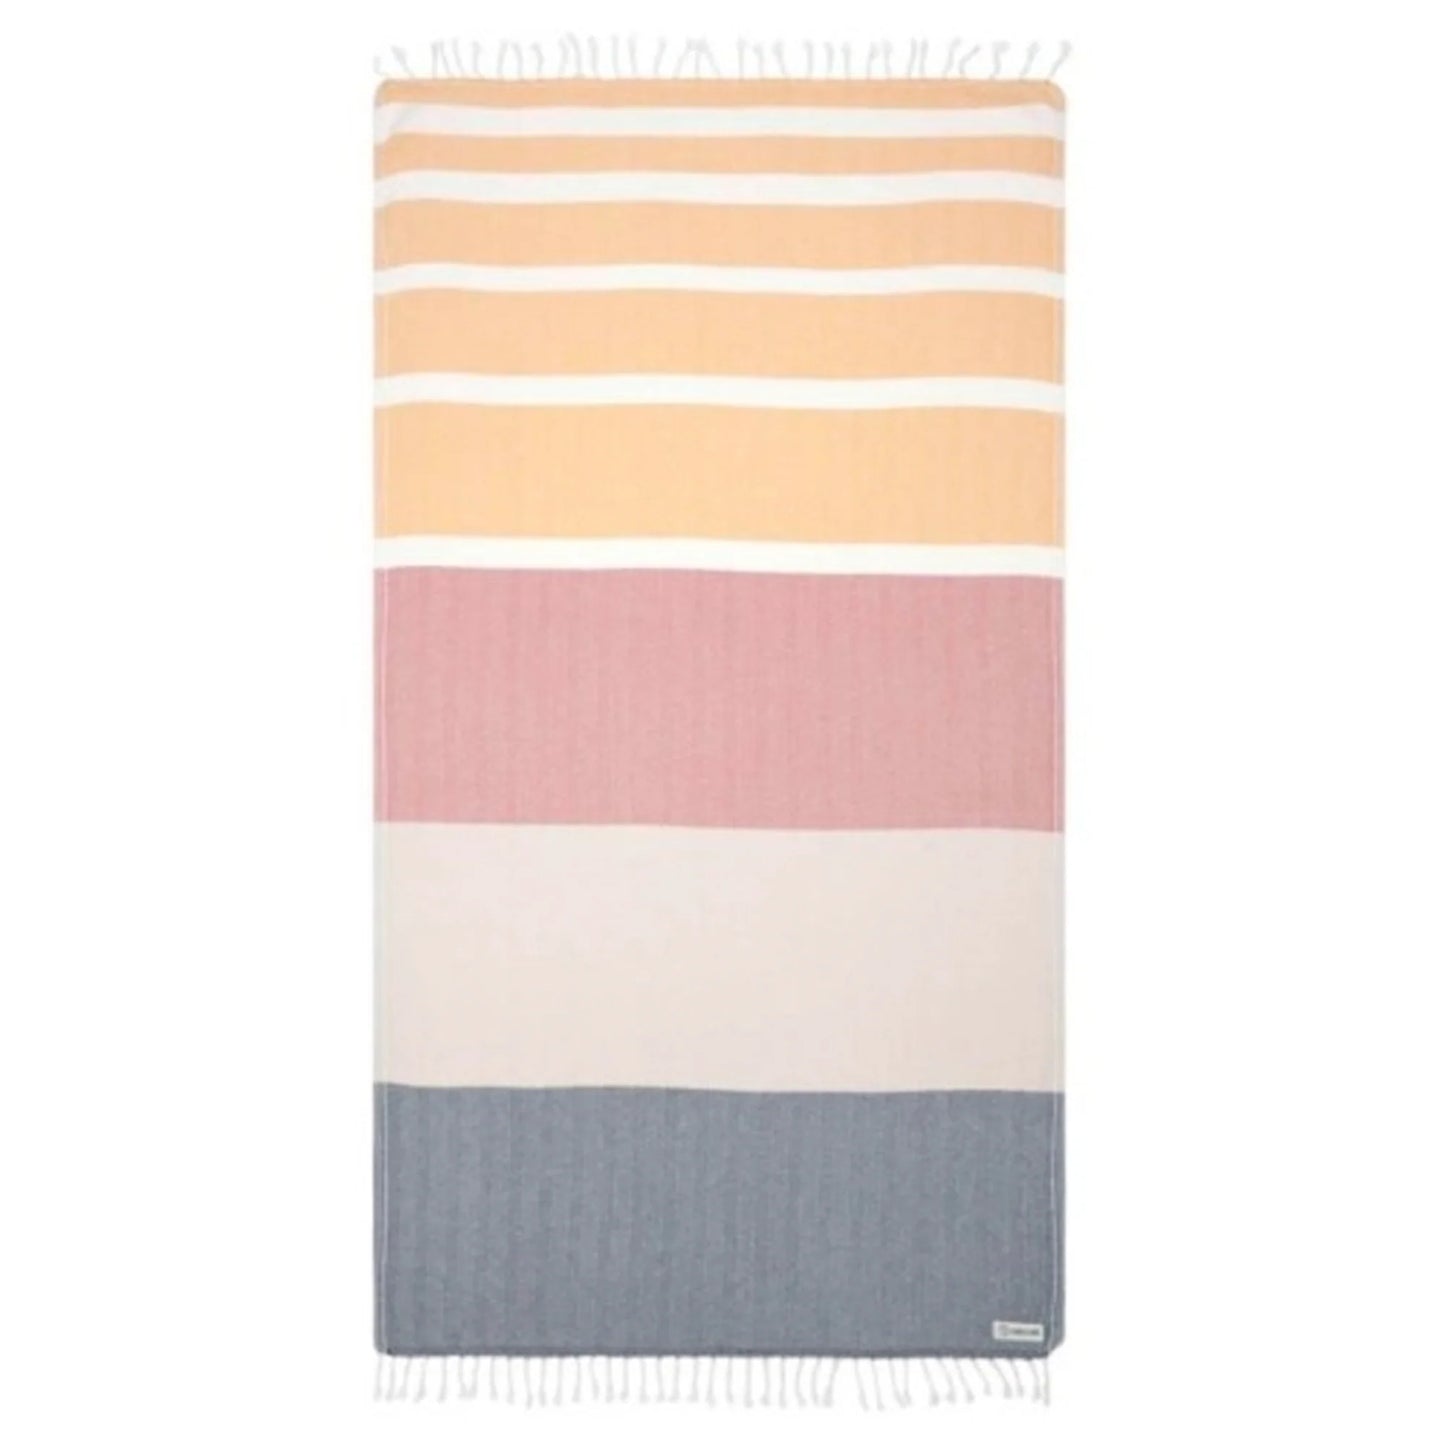 Organic turkish cotton beach towel with colored stripes of various widths and tassled ends.